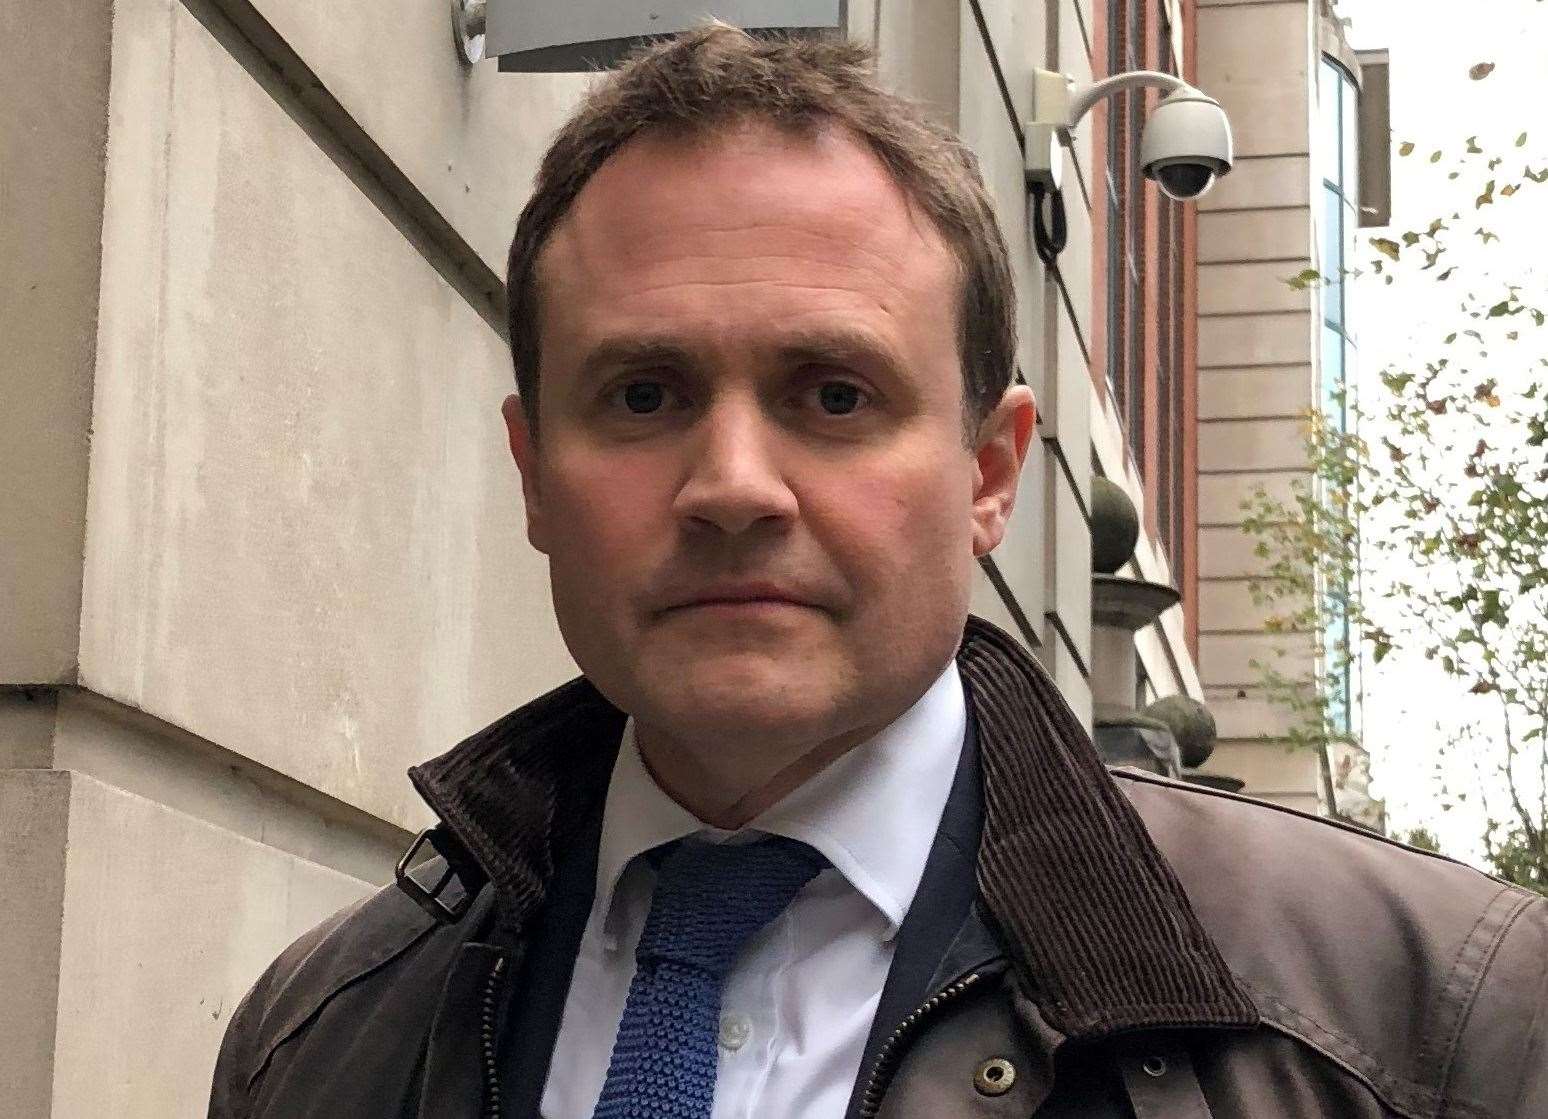 Tom Tugendhat said the UK should "go in hard early" with sanctions to "make it extremely clear what you're going to do".